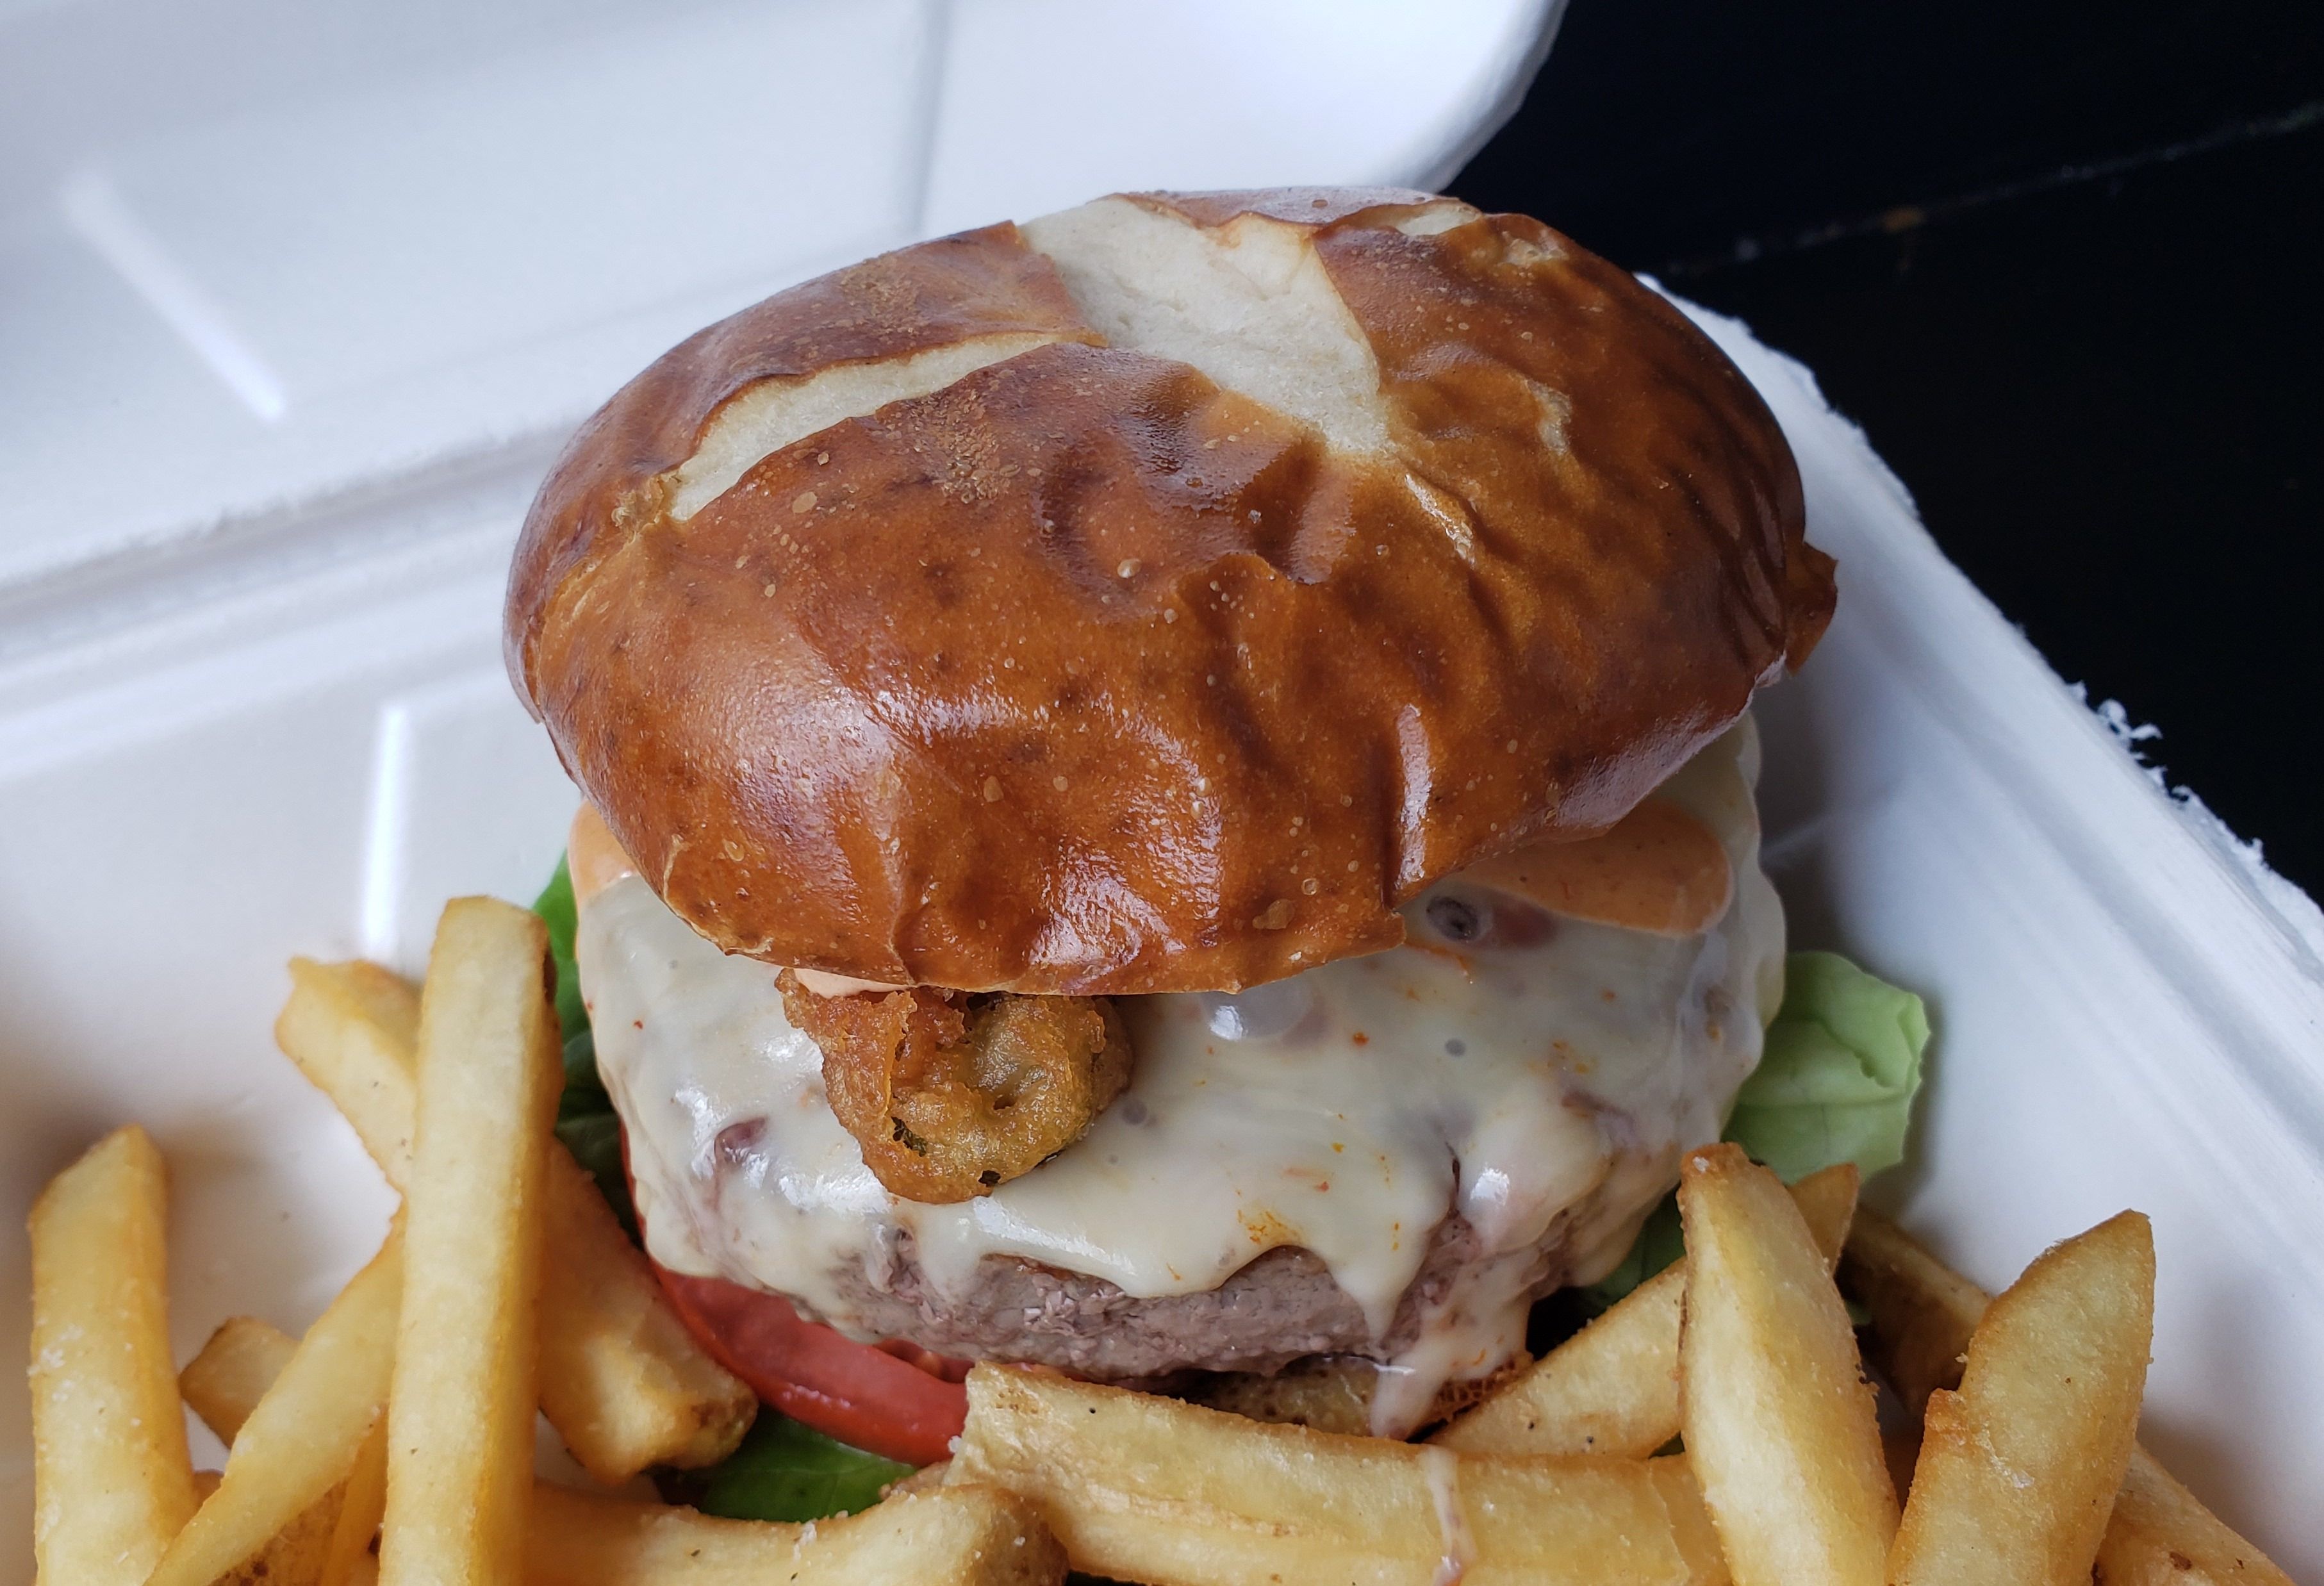 Burger with melted cheese on pretzel bun, surrounded by French fries in a styrofoam box.